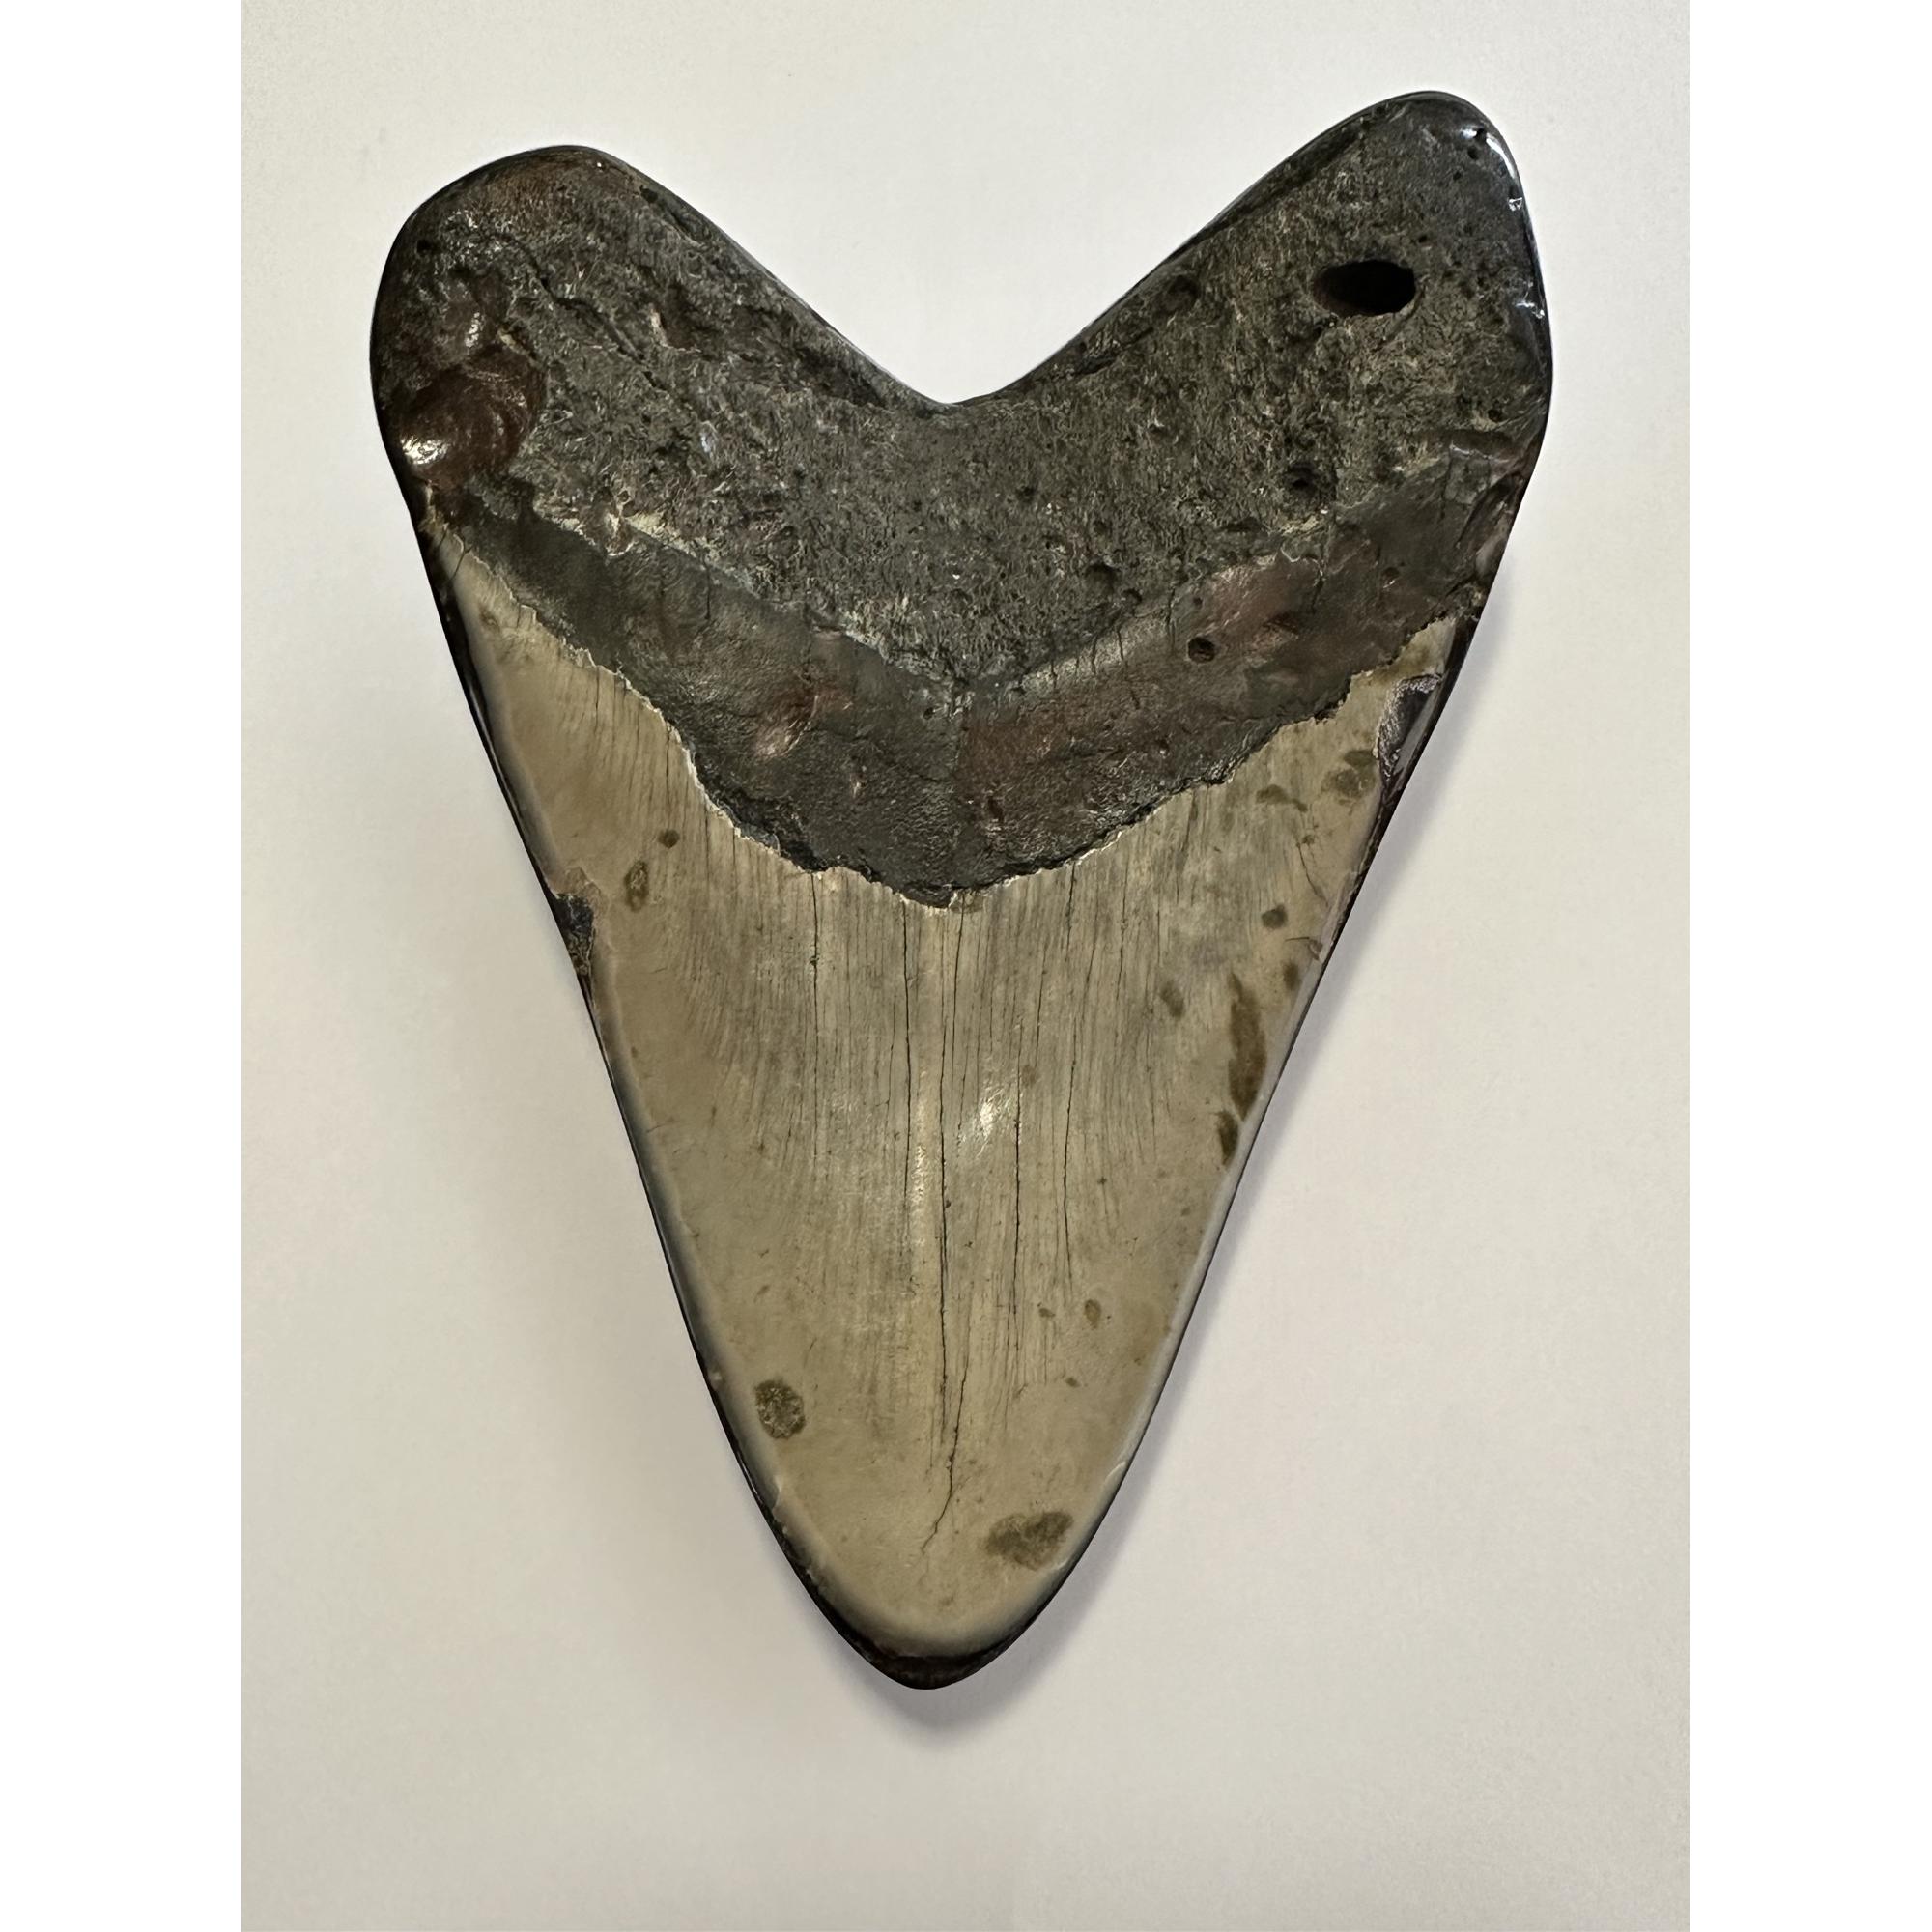 Gorgeous natural cream cream color enamel with a high polished edge on a huge Megalodon tooth